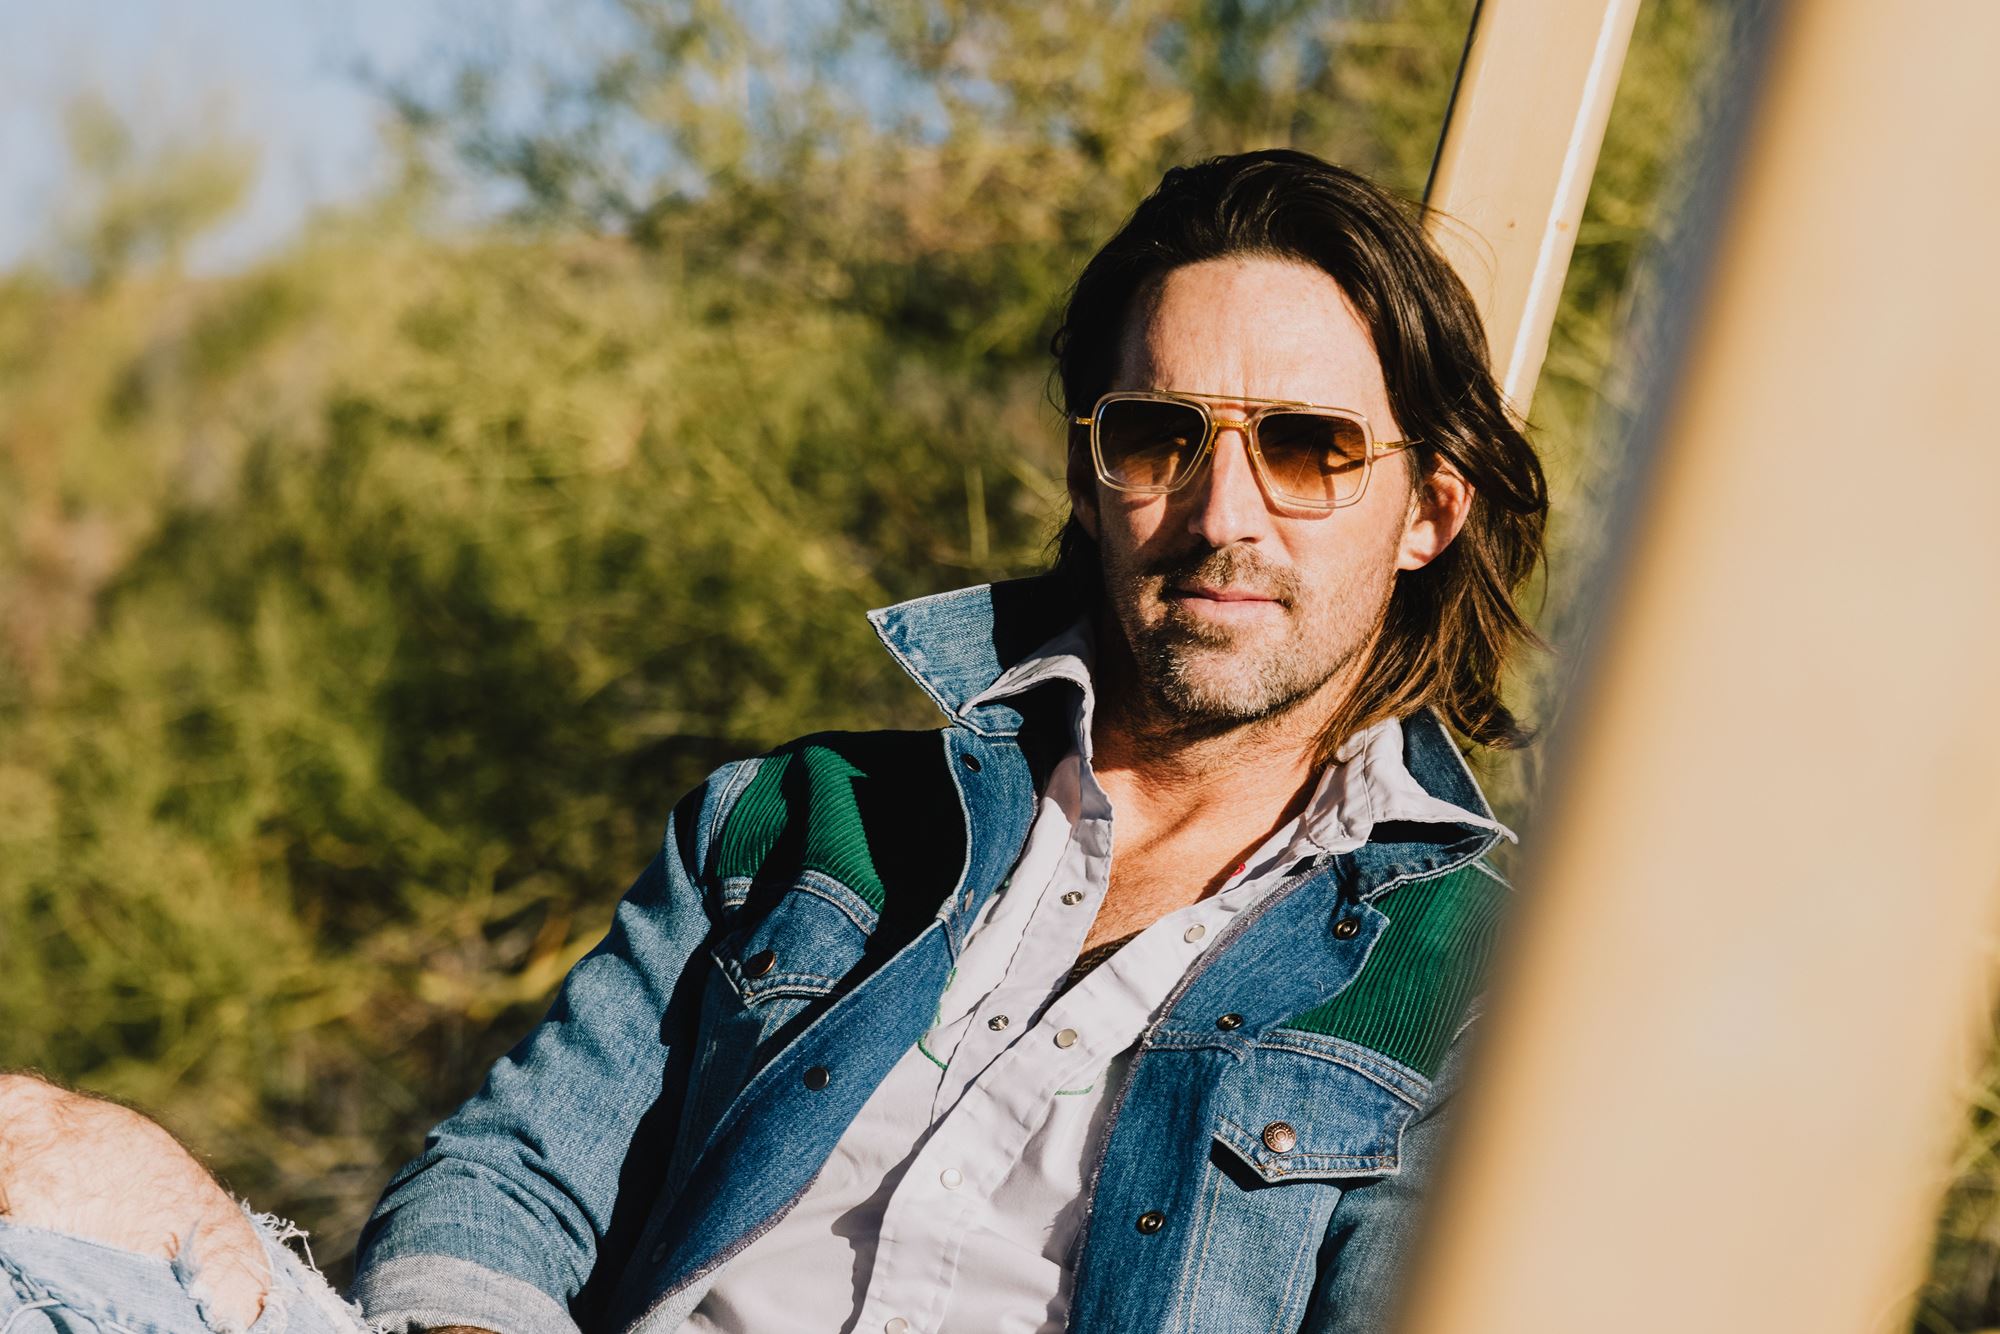 PRCA Rodeo w/ Jake Owen <br> Friday, Feb. 10 at 7 PM